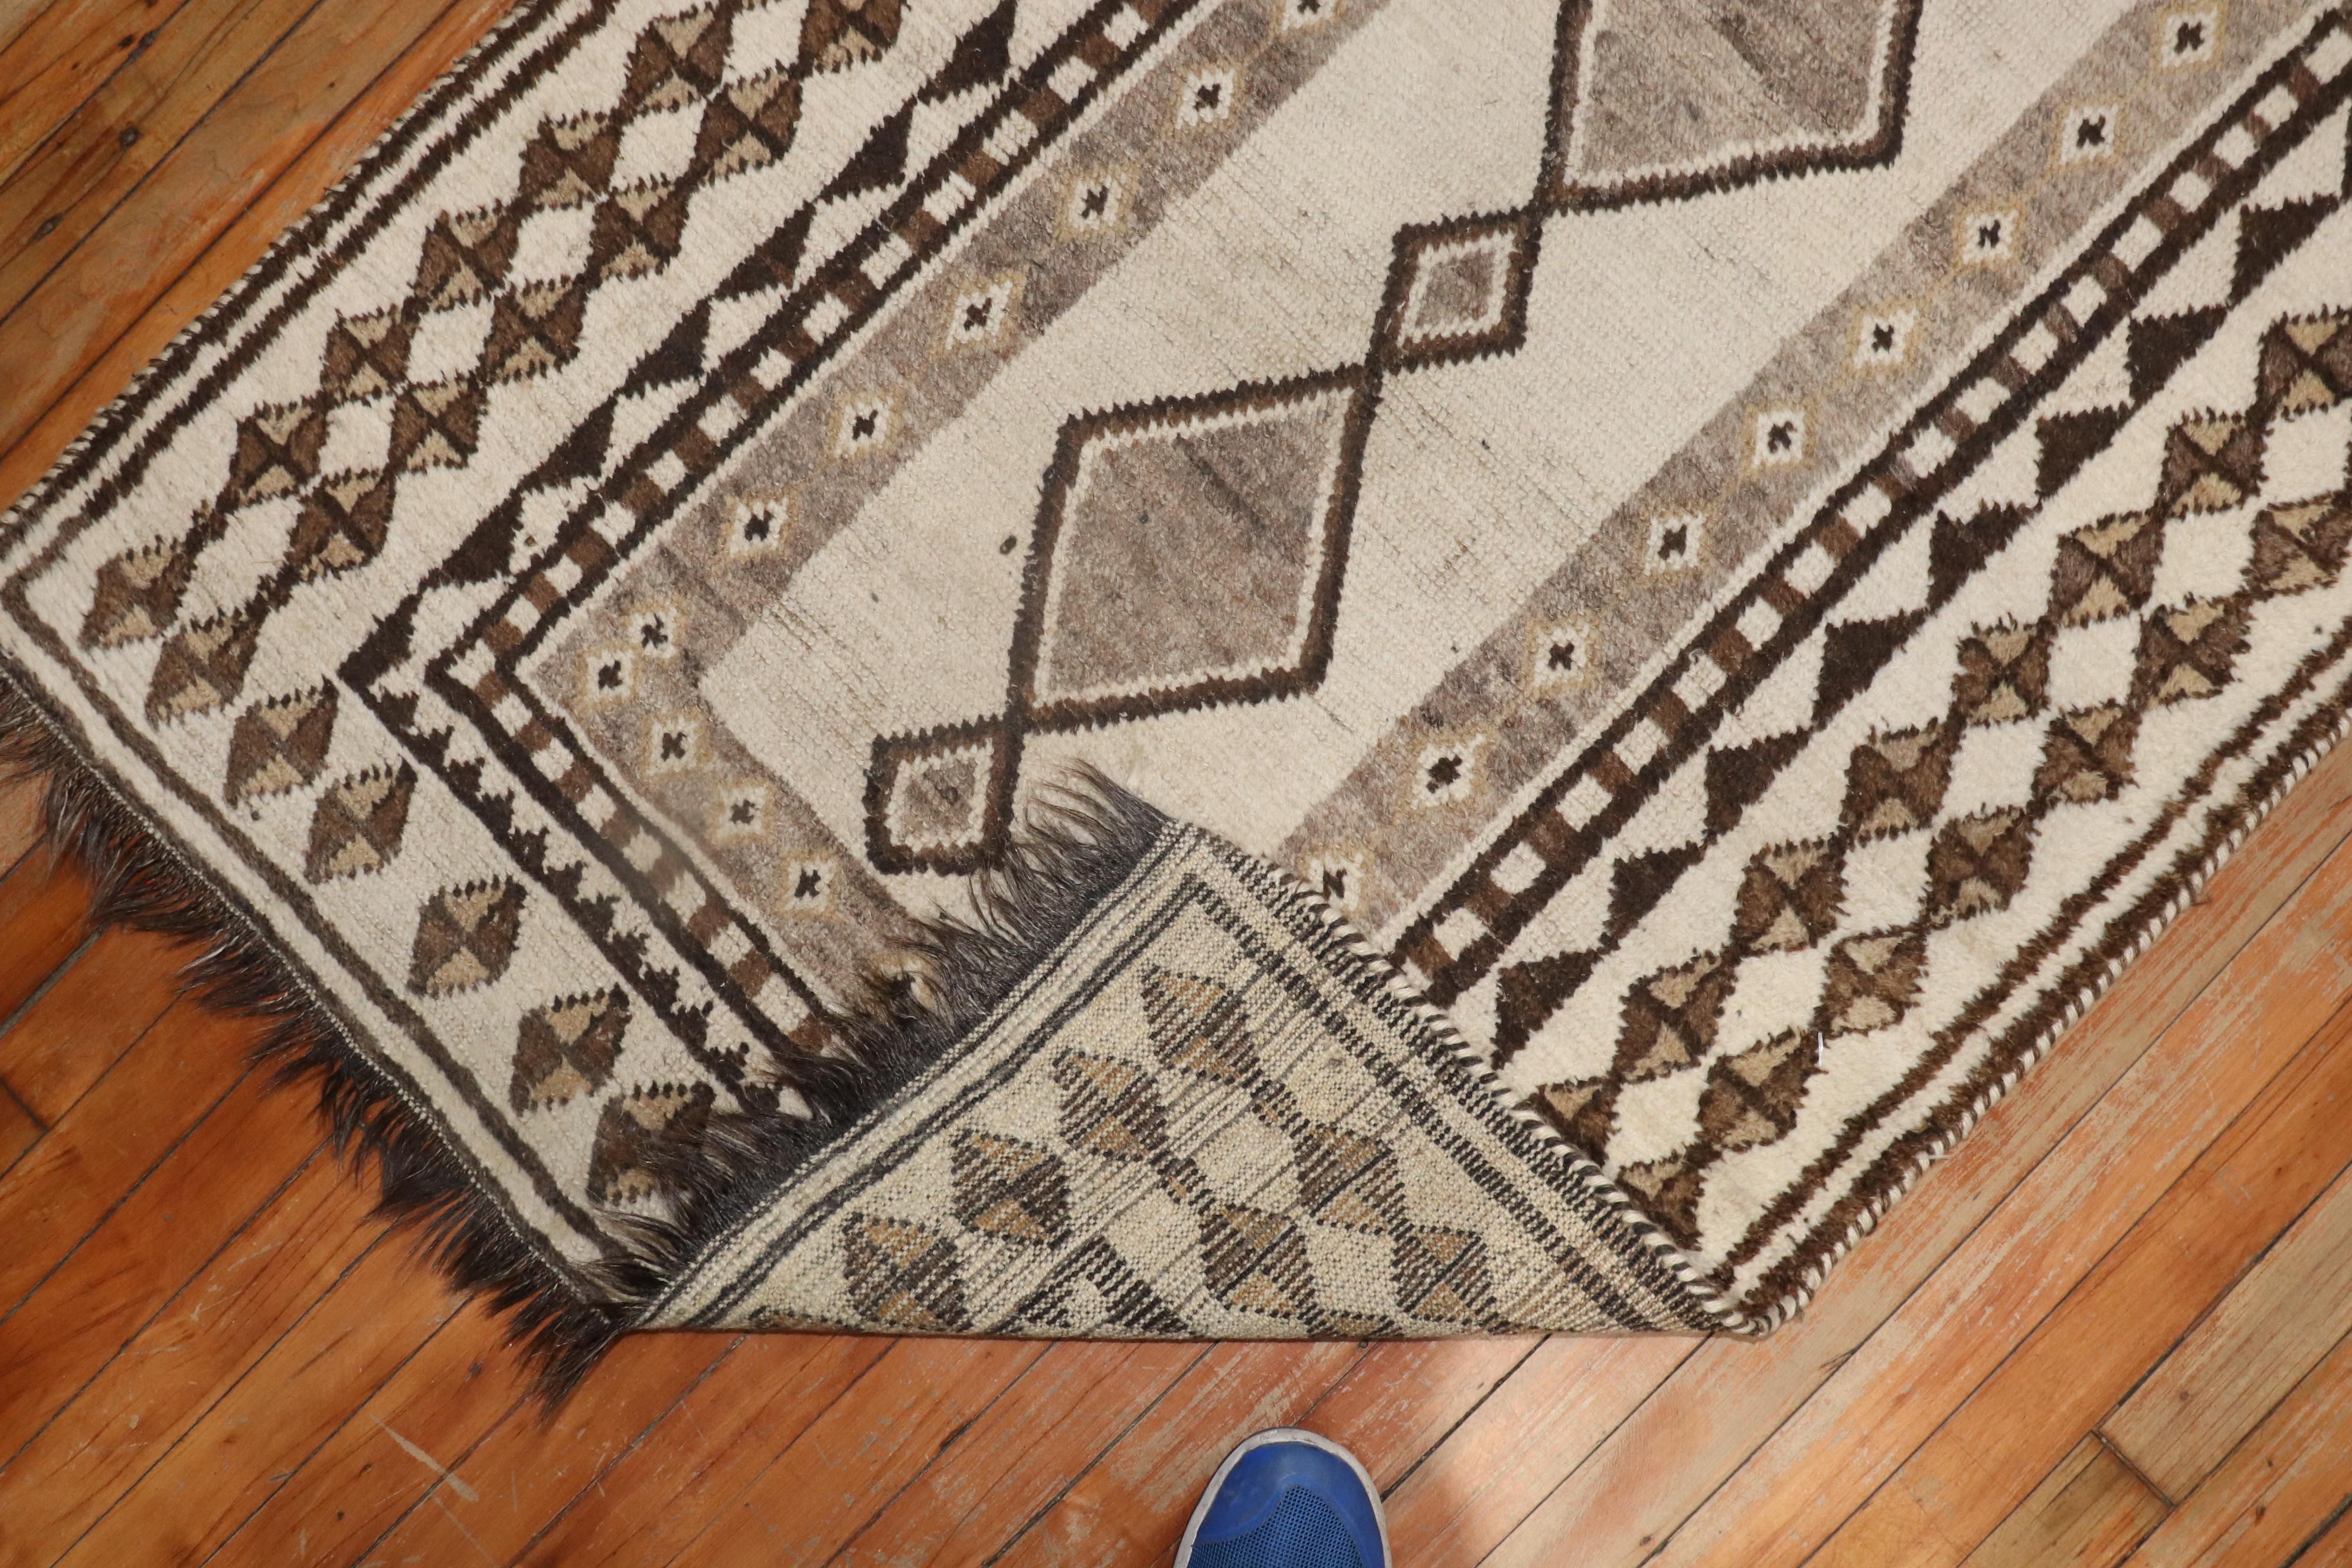 Mid-20th century Tribal Persian Gabbeh small runner in in white, grey and brown.

Measures: 3'3'' x 6'5''.